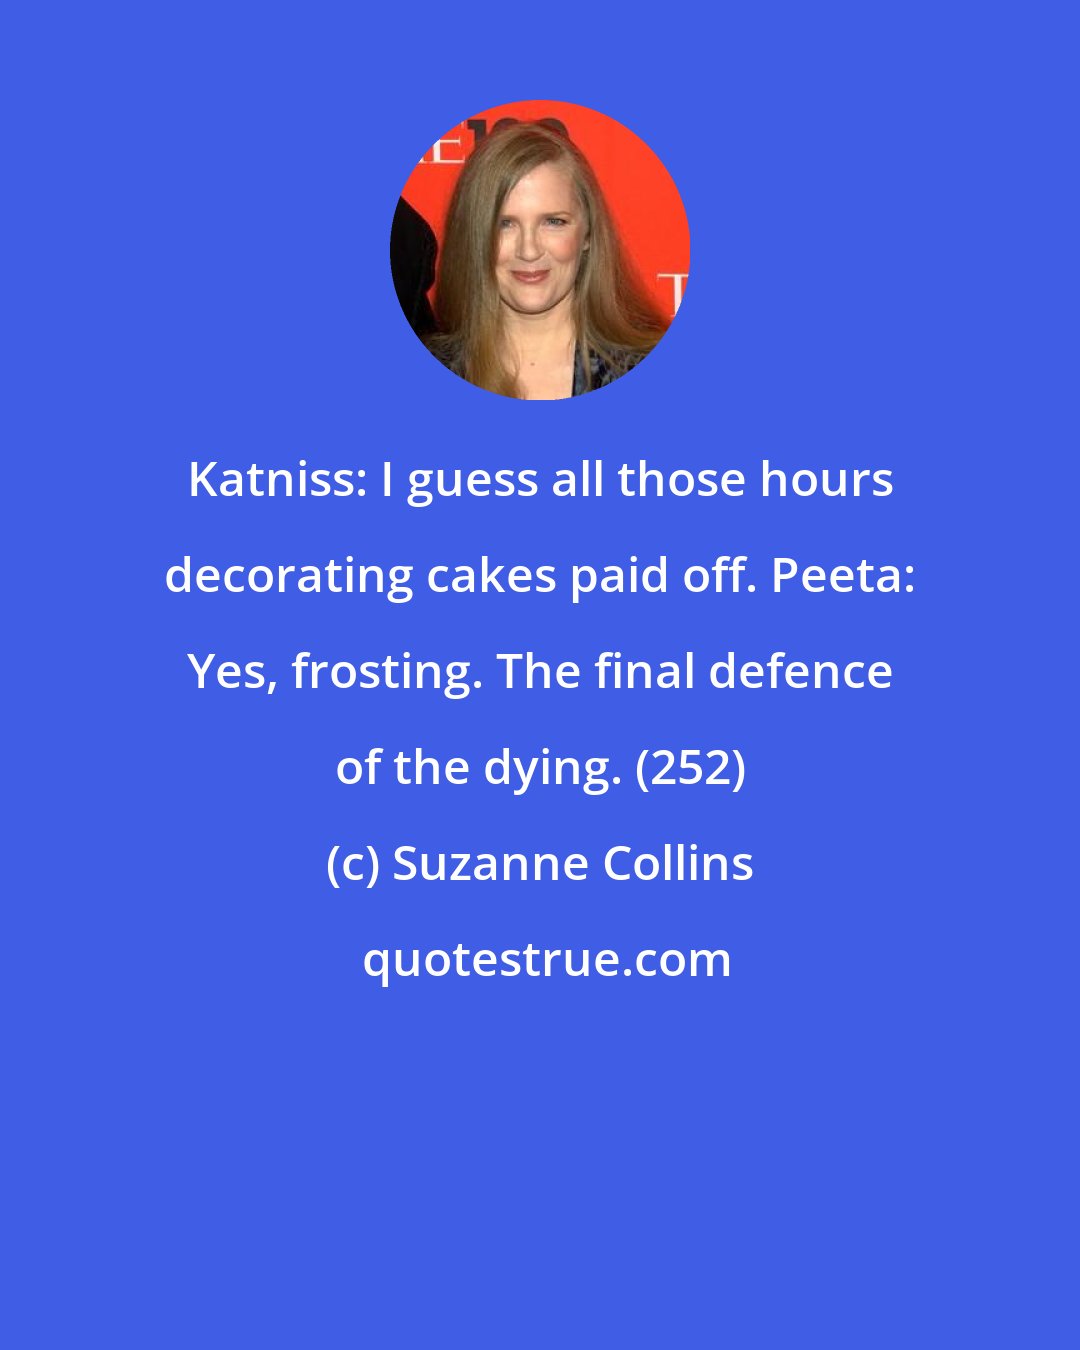 Suzanne Collins: Katniss: I guess all those hours decorating cakes paid off. Peeta: Yes, frosting. The final defence of the dying. (252)